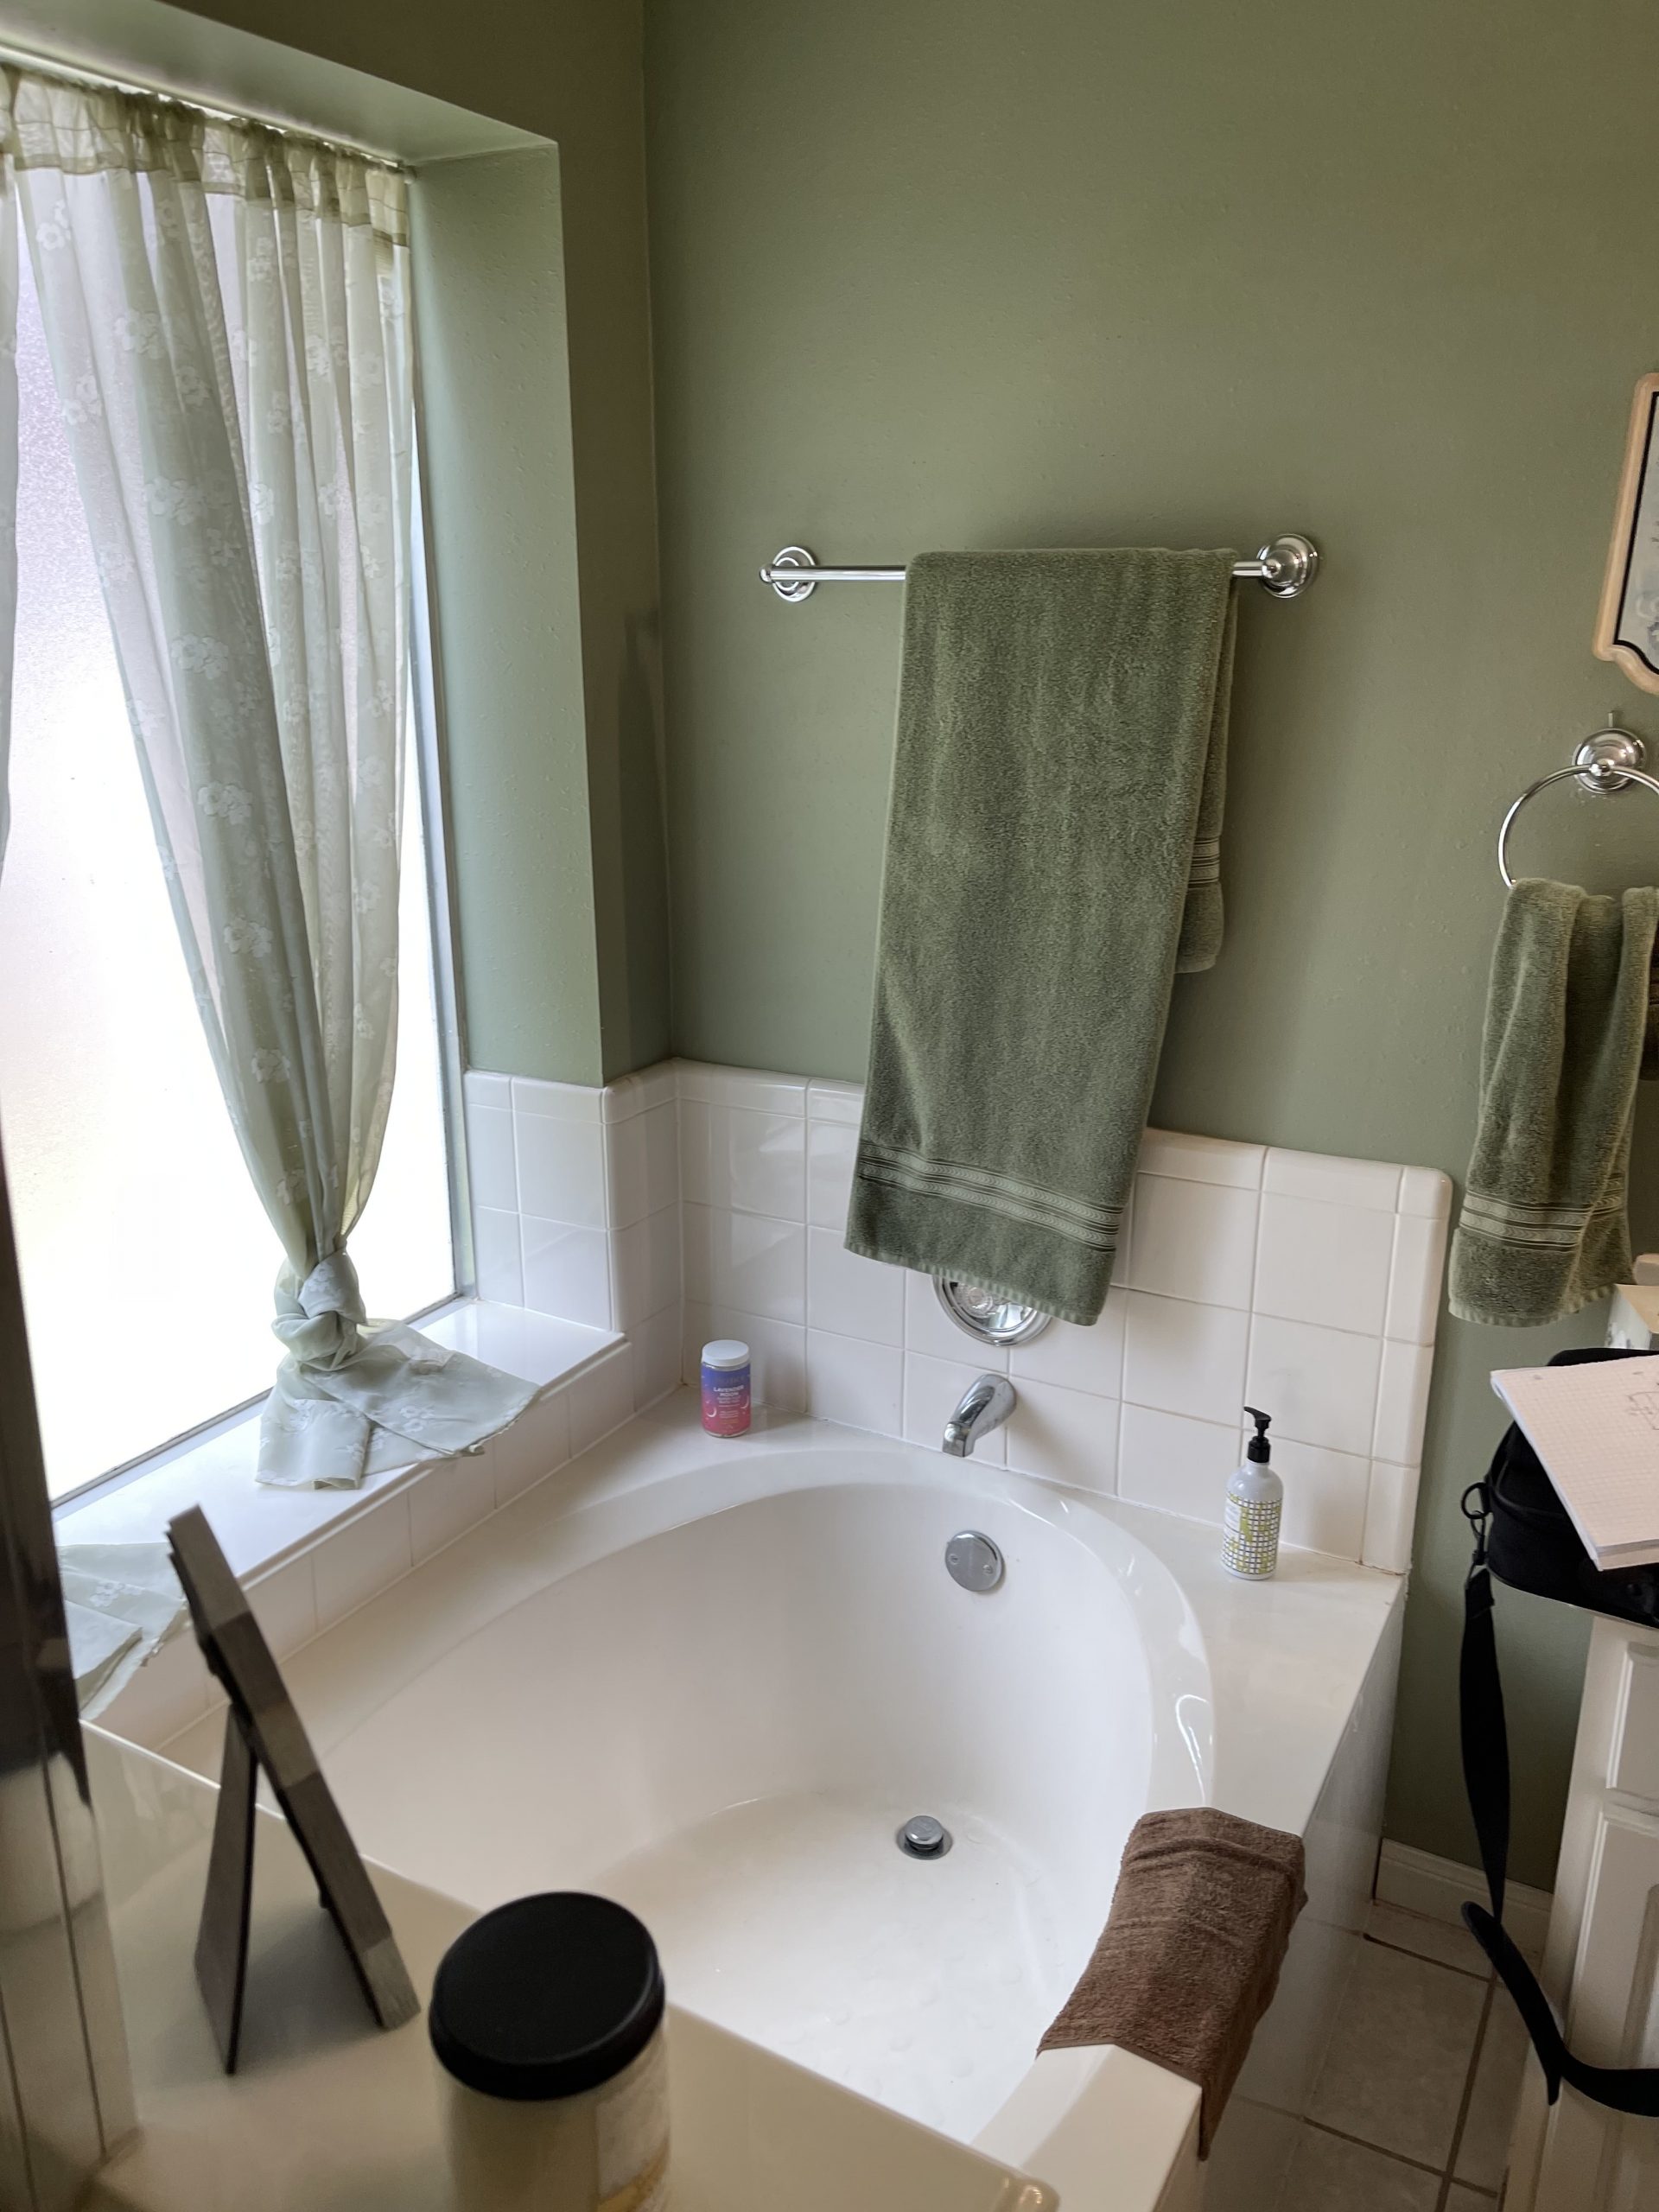 Unique Bathroom Ideas For Your Home Remodel In Houston, TX